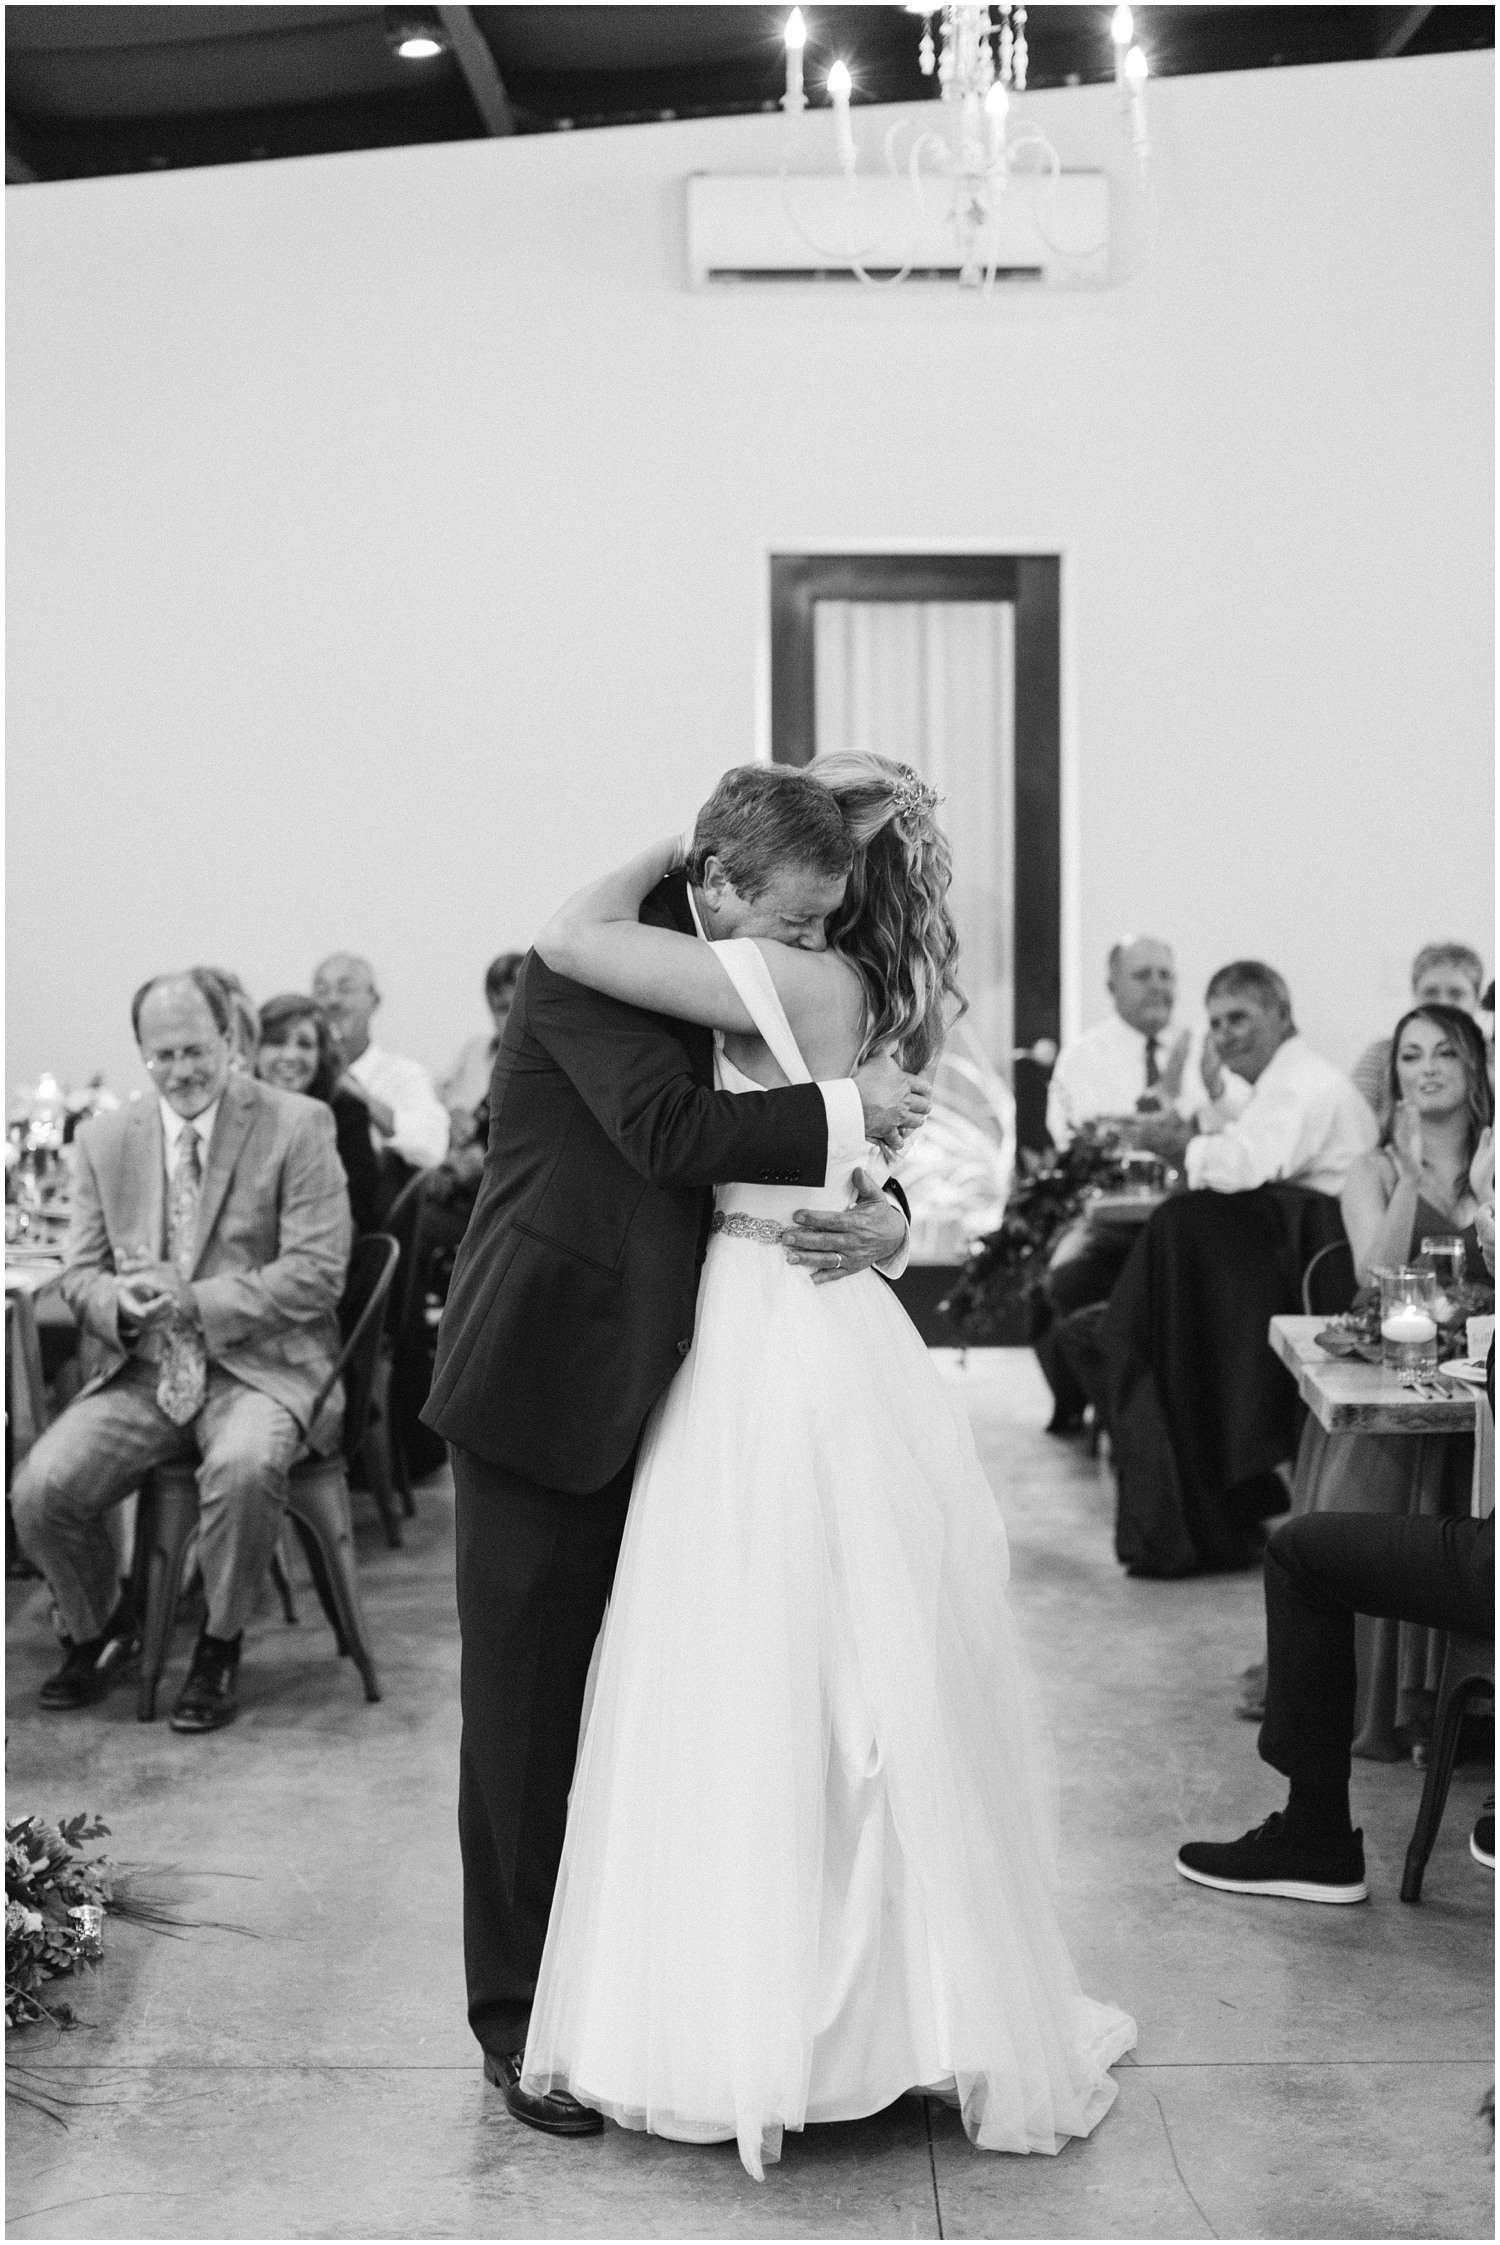 father hugs bride during dance at wedding reception